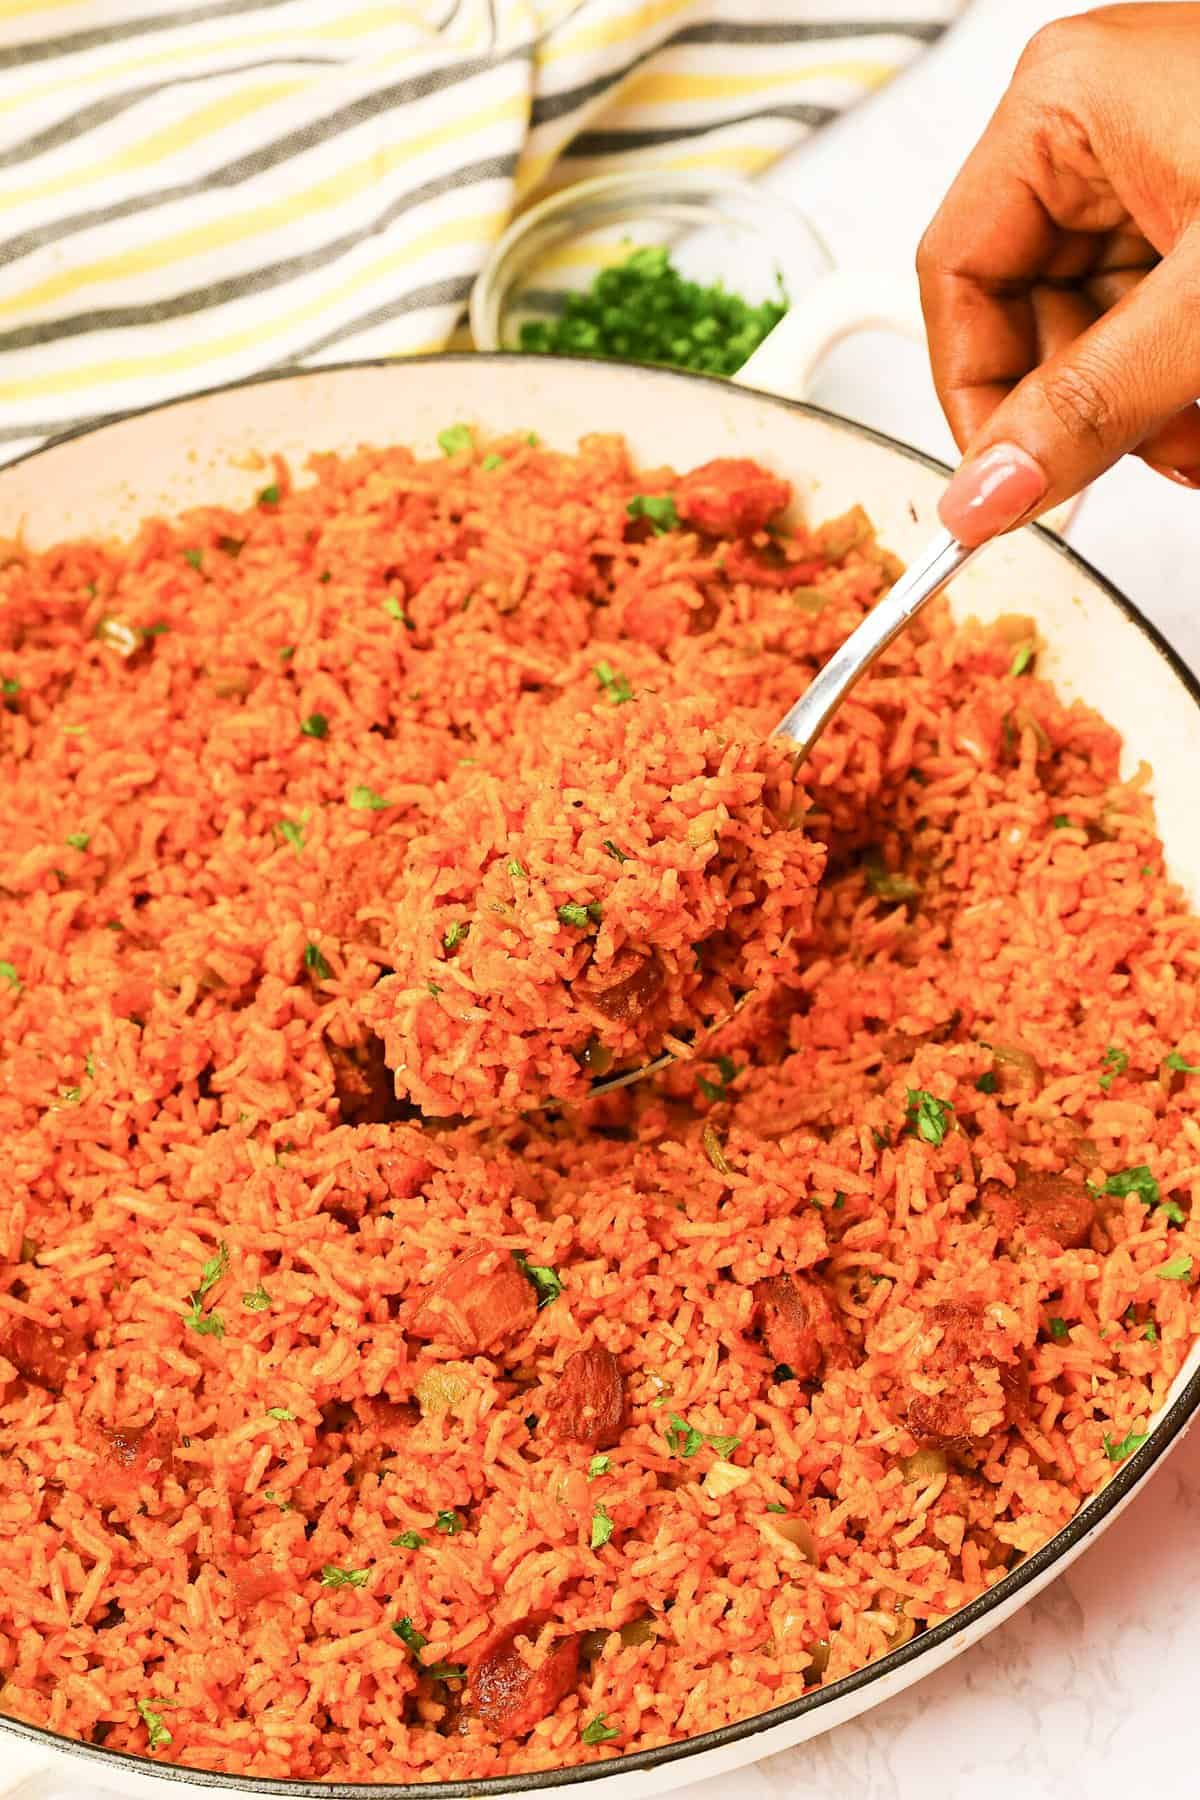 Serving up insanely delicious Charleston Red Rice